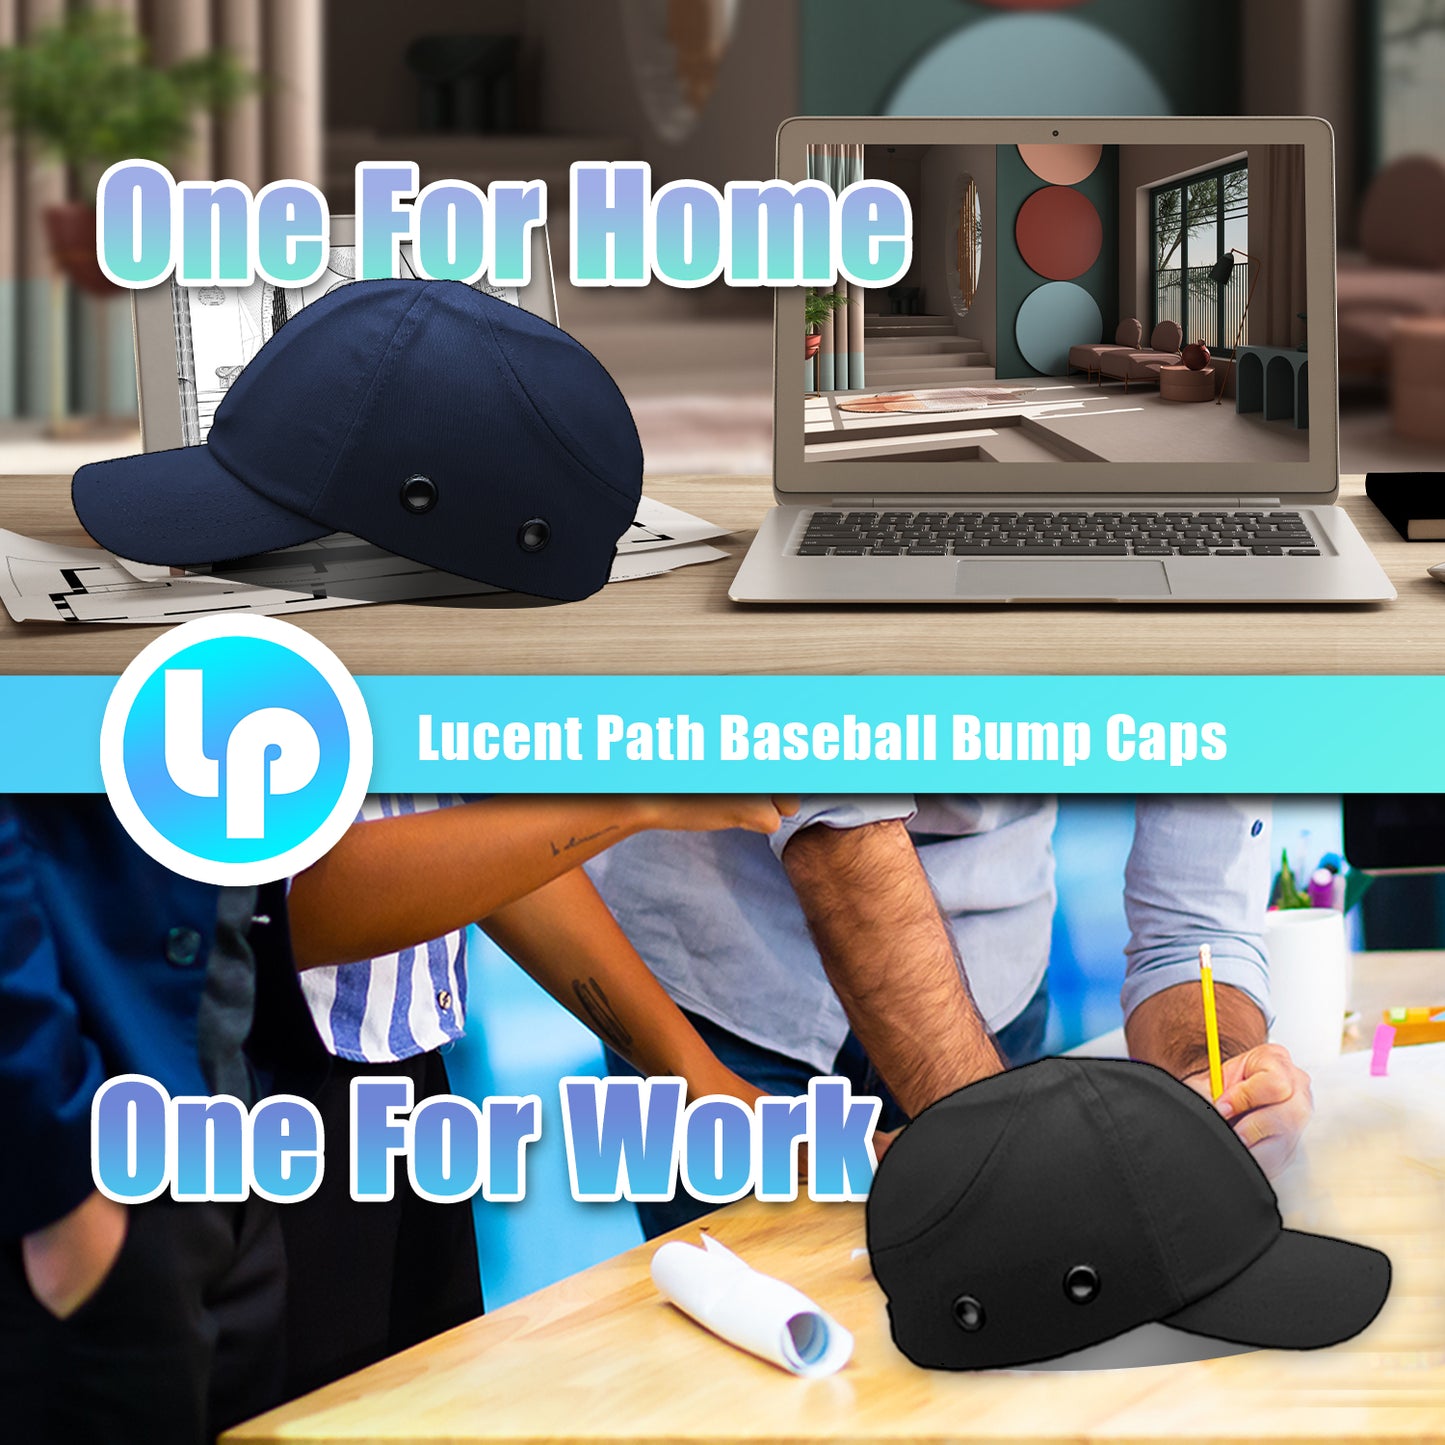 Black and Blue - Lucent Path Baseball Bump Cap Hard Hat Helmet Safety Cap For Men and Women